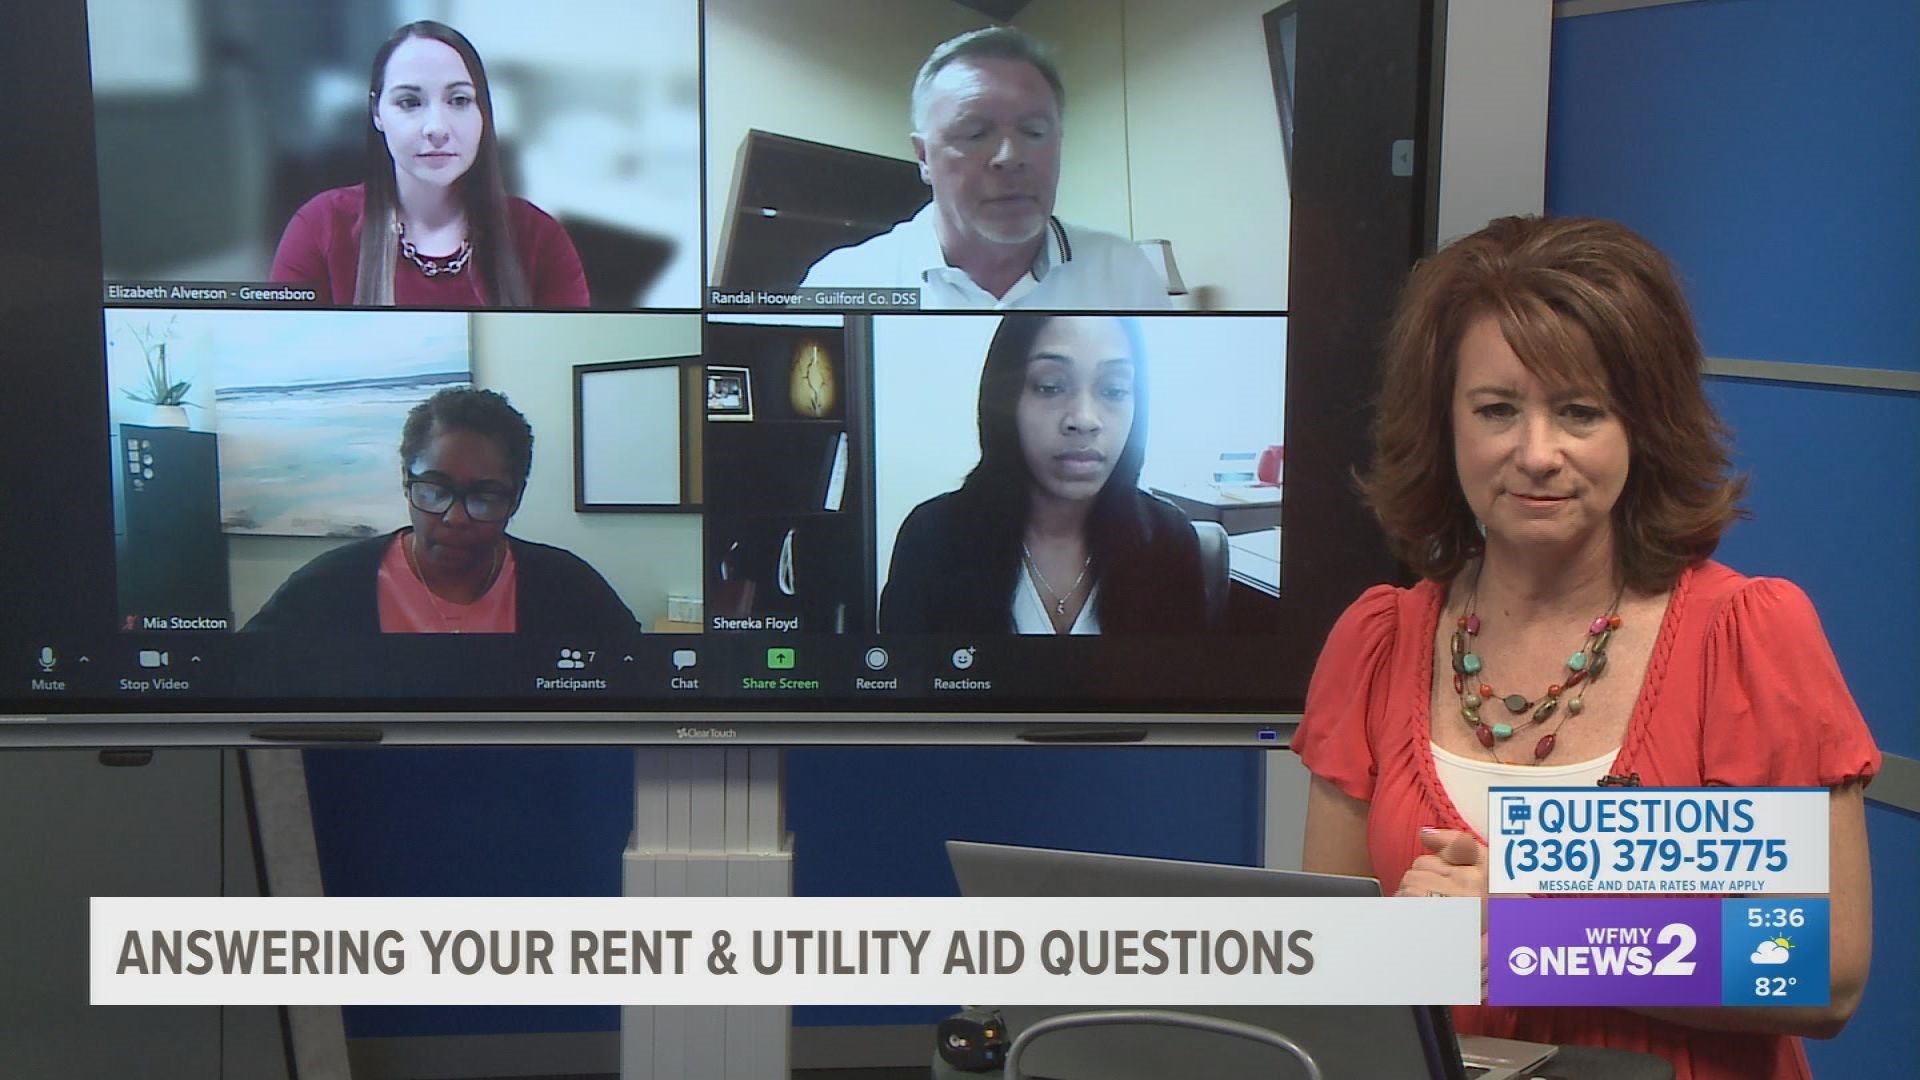 Residents in Guilford and Forsyth counties can still request help covering their rent and utilities until they’re back on their feet after the pandemic.